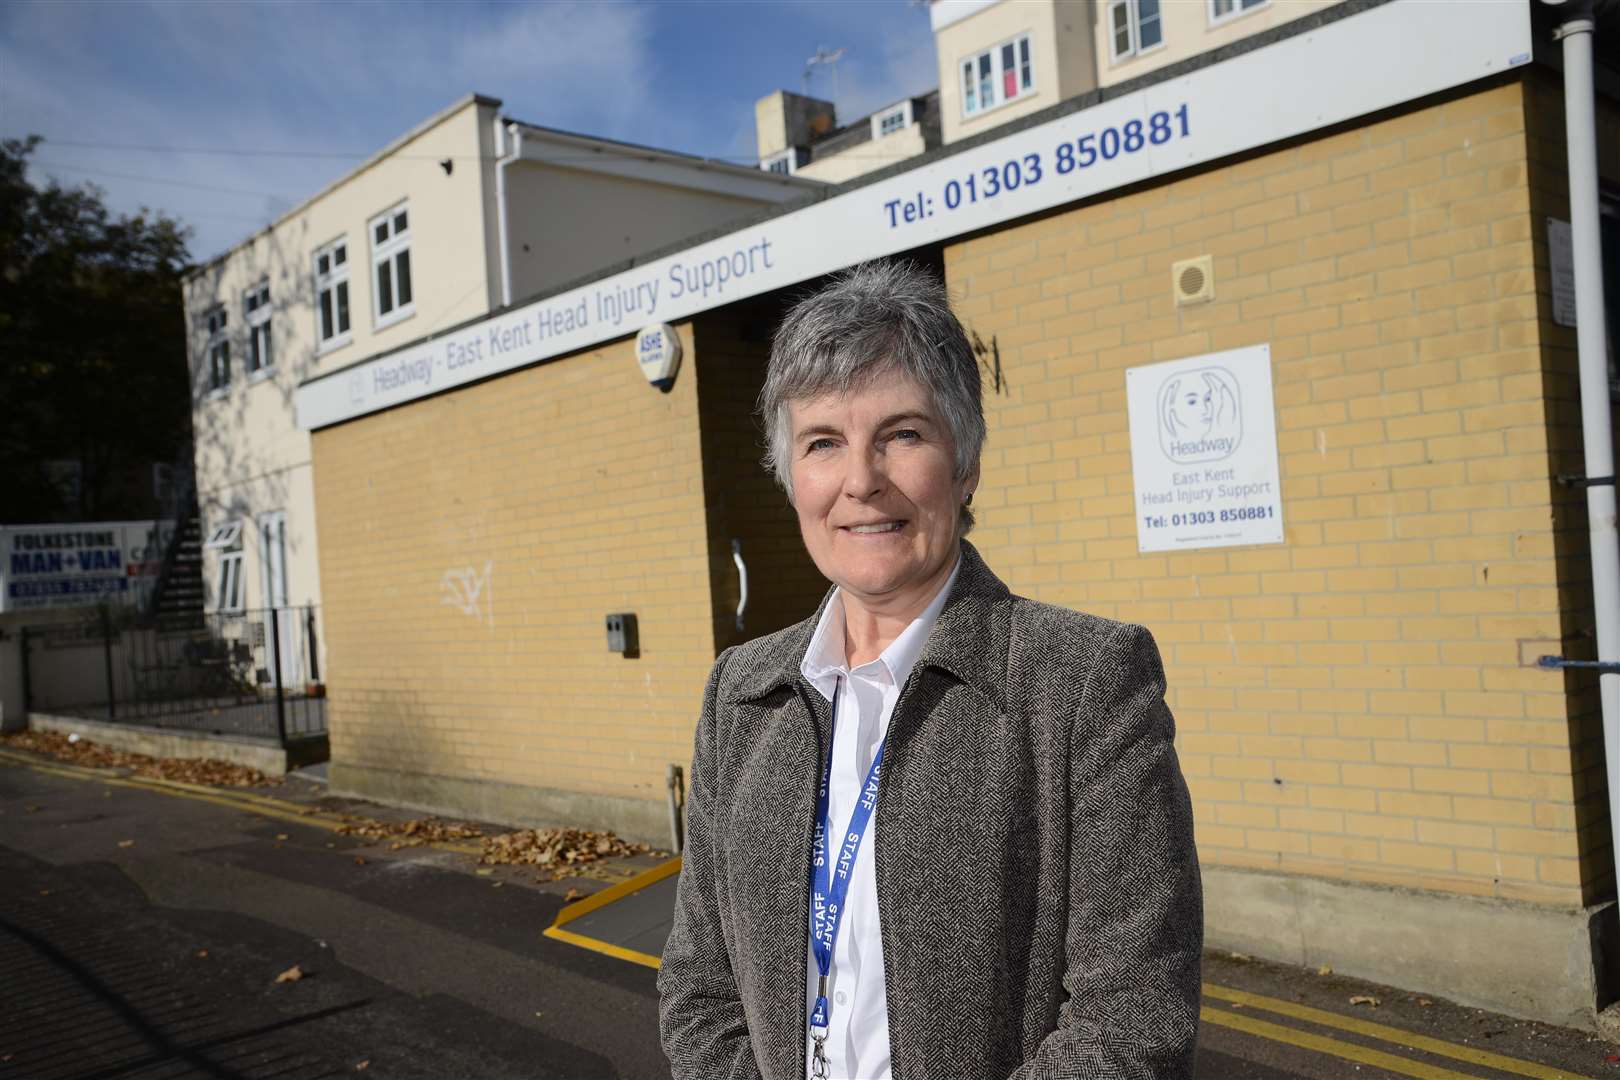 Day Centre manager, Paula Brown at the old Headway East Kent venue in Folkestone. Picture: Gary Browne